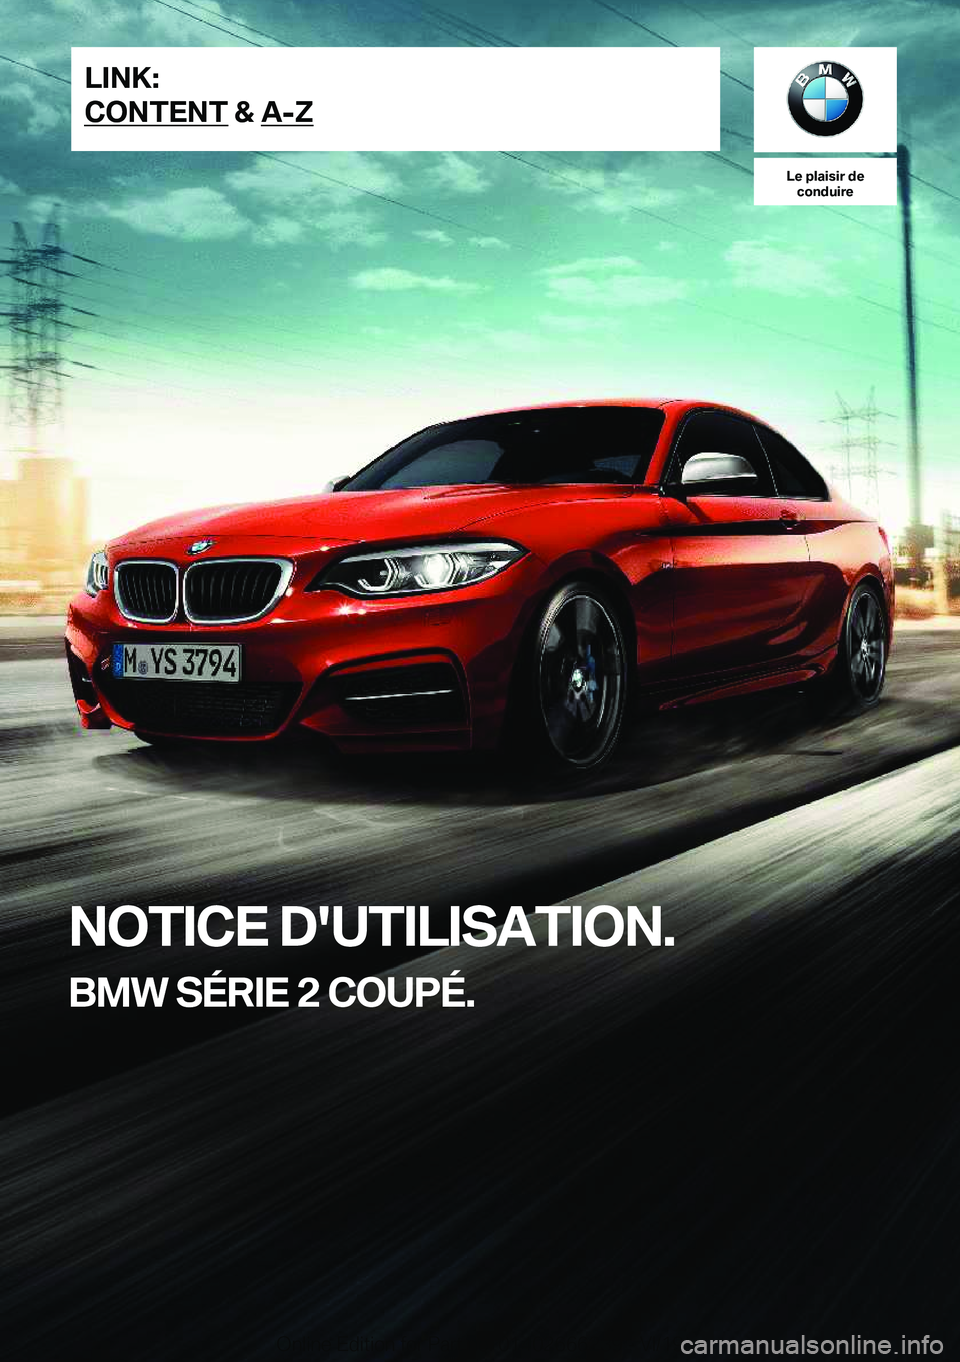 BMW 2 SERIES COUPE 2020  Notices Demploi (in French) �L�e��p�l�a�i�s�i�r��d�e�c�o�n�d�u�i�r�e
�N�O�T�I�C�E��D�'�U�T�I�L�I�S�A�T�I�O�N�.
�B�M�W��S�É�R�I�E��2��C�O�U�P�É�.�L�I�N�K�:
�C�O�N�T�E�N�T��&��A�-�;�O�n�l�i�n�e��E�d�i�t�i�o�n��f�o�